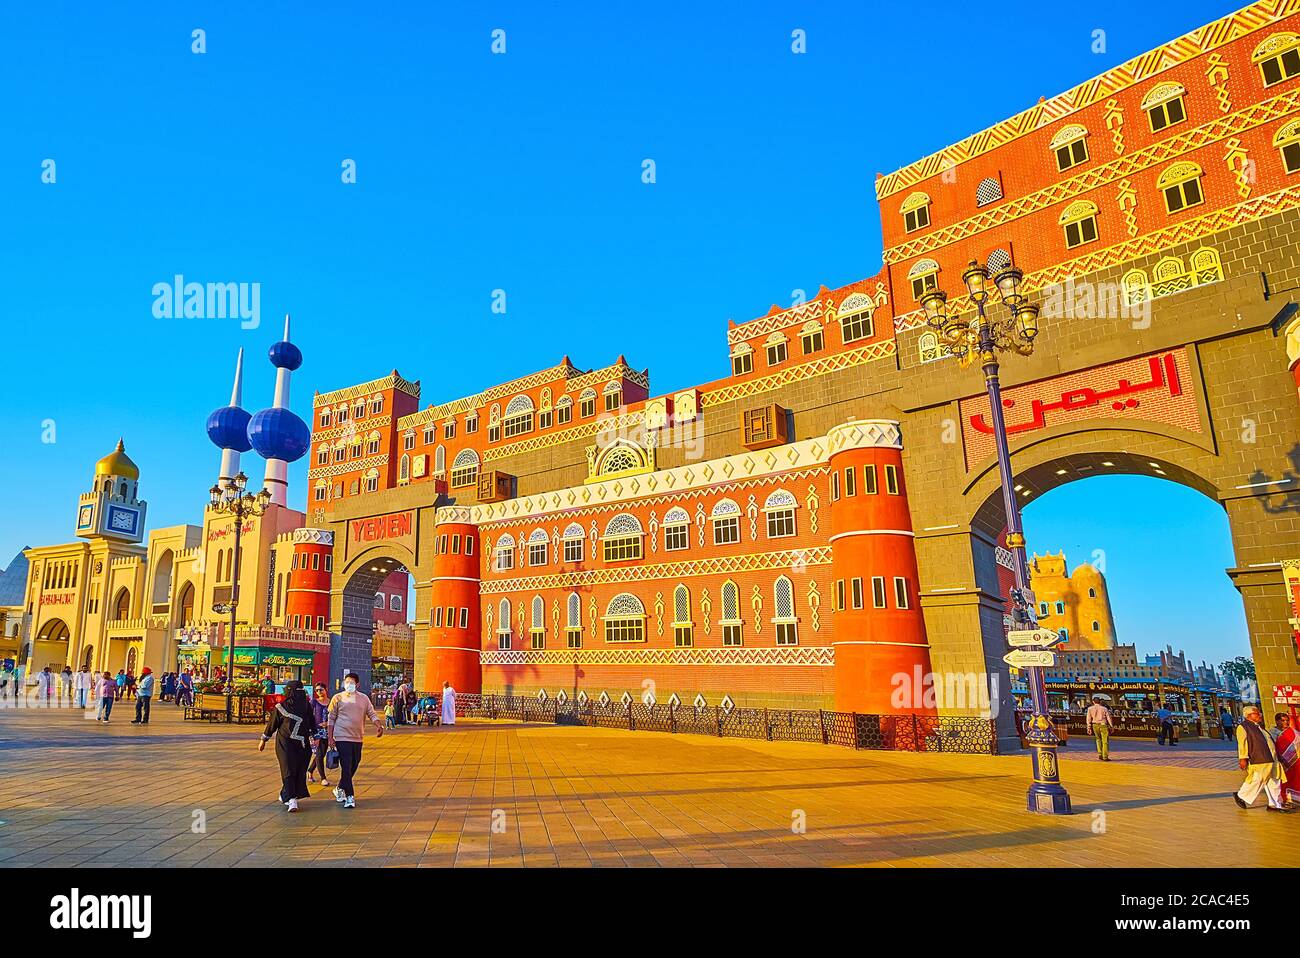 DUBAI, UAE - MARCH 5, 2020: The alley of Global Village, stretching along pavilions of different countries, decorated with their architectural landmar Stock Photo